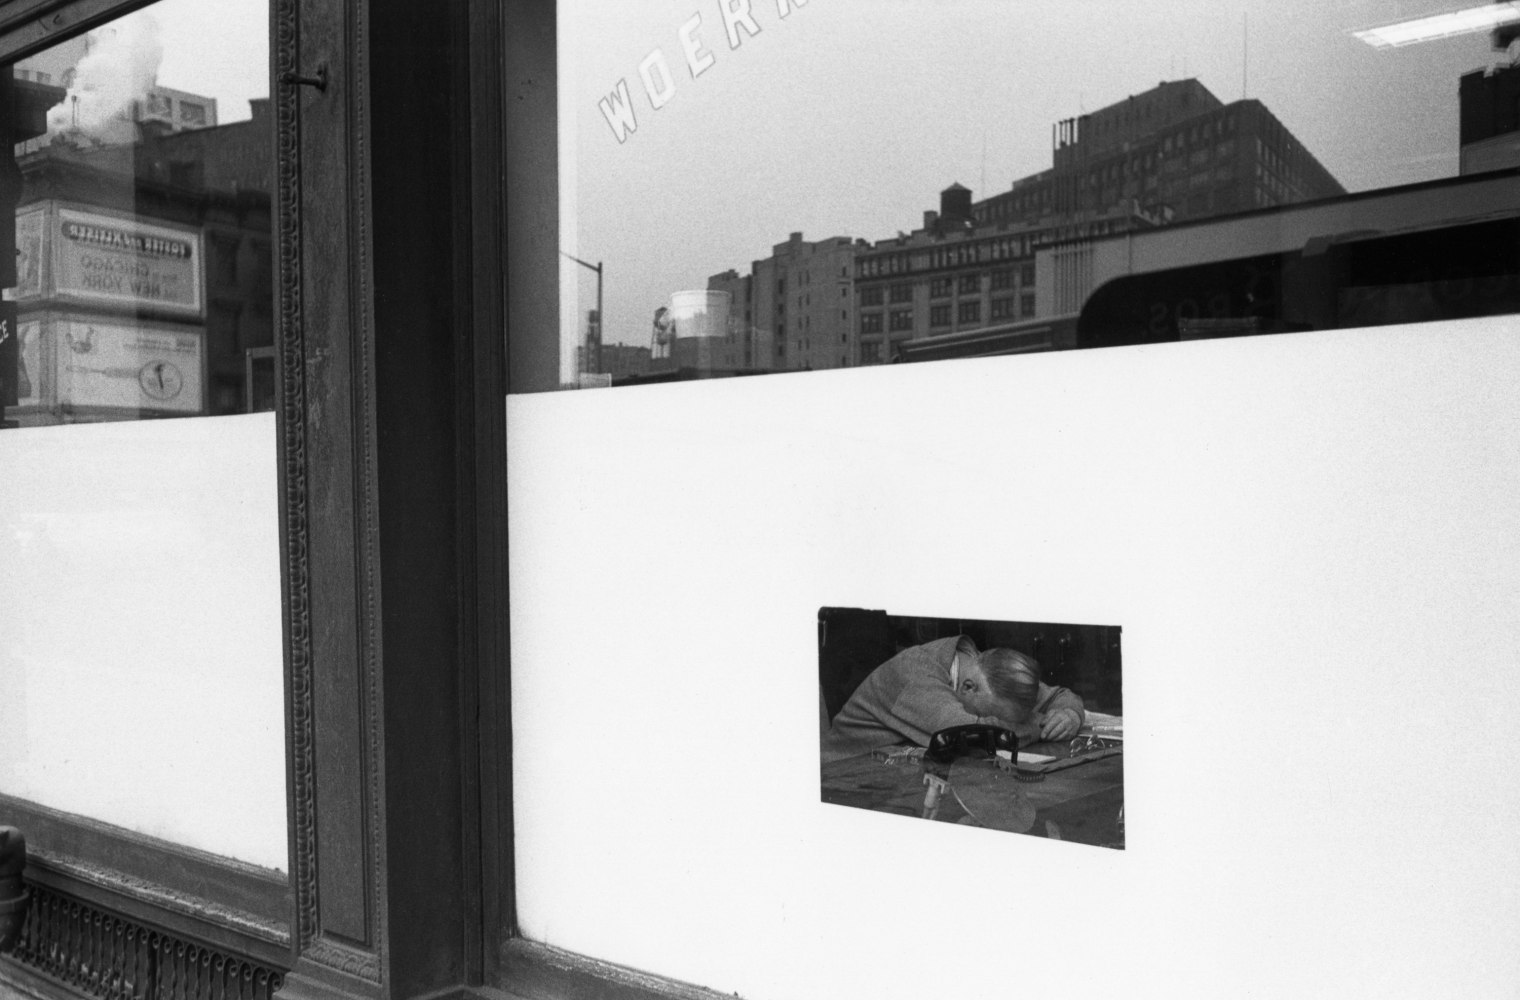 Lee Friedlander
New York City, 1964 / printed 1960s
Gelatin silver print
Image: 6 3/8 x 9 3/4 inches&amp;nbsp;
Sheet: 7 x 11 inches